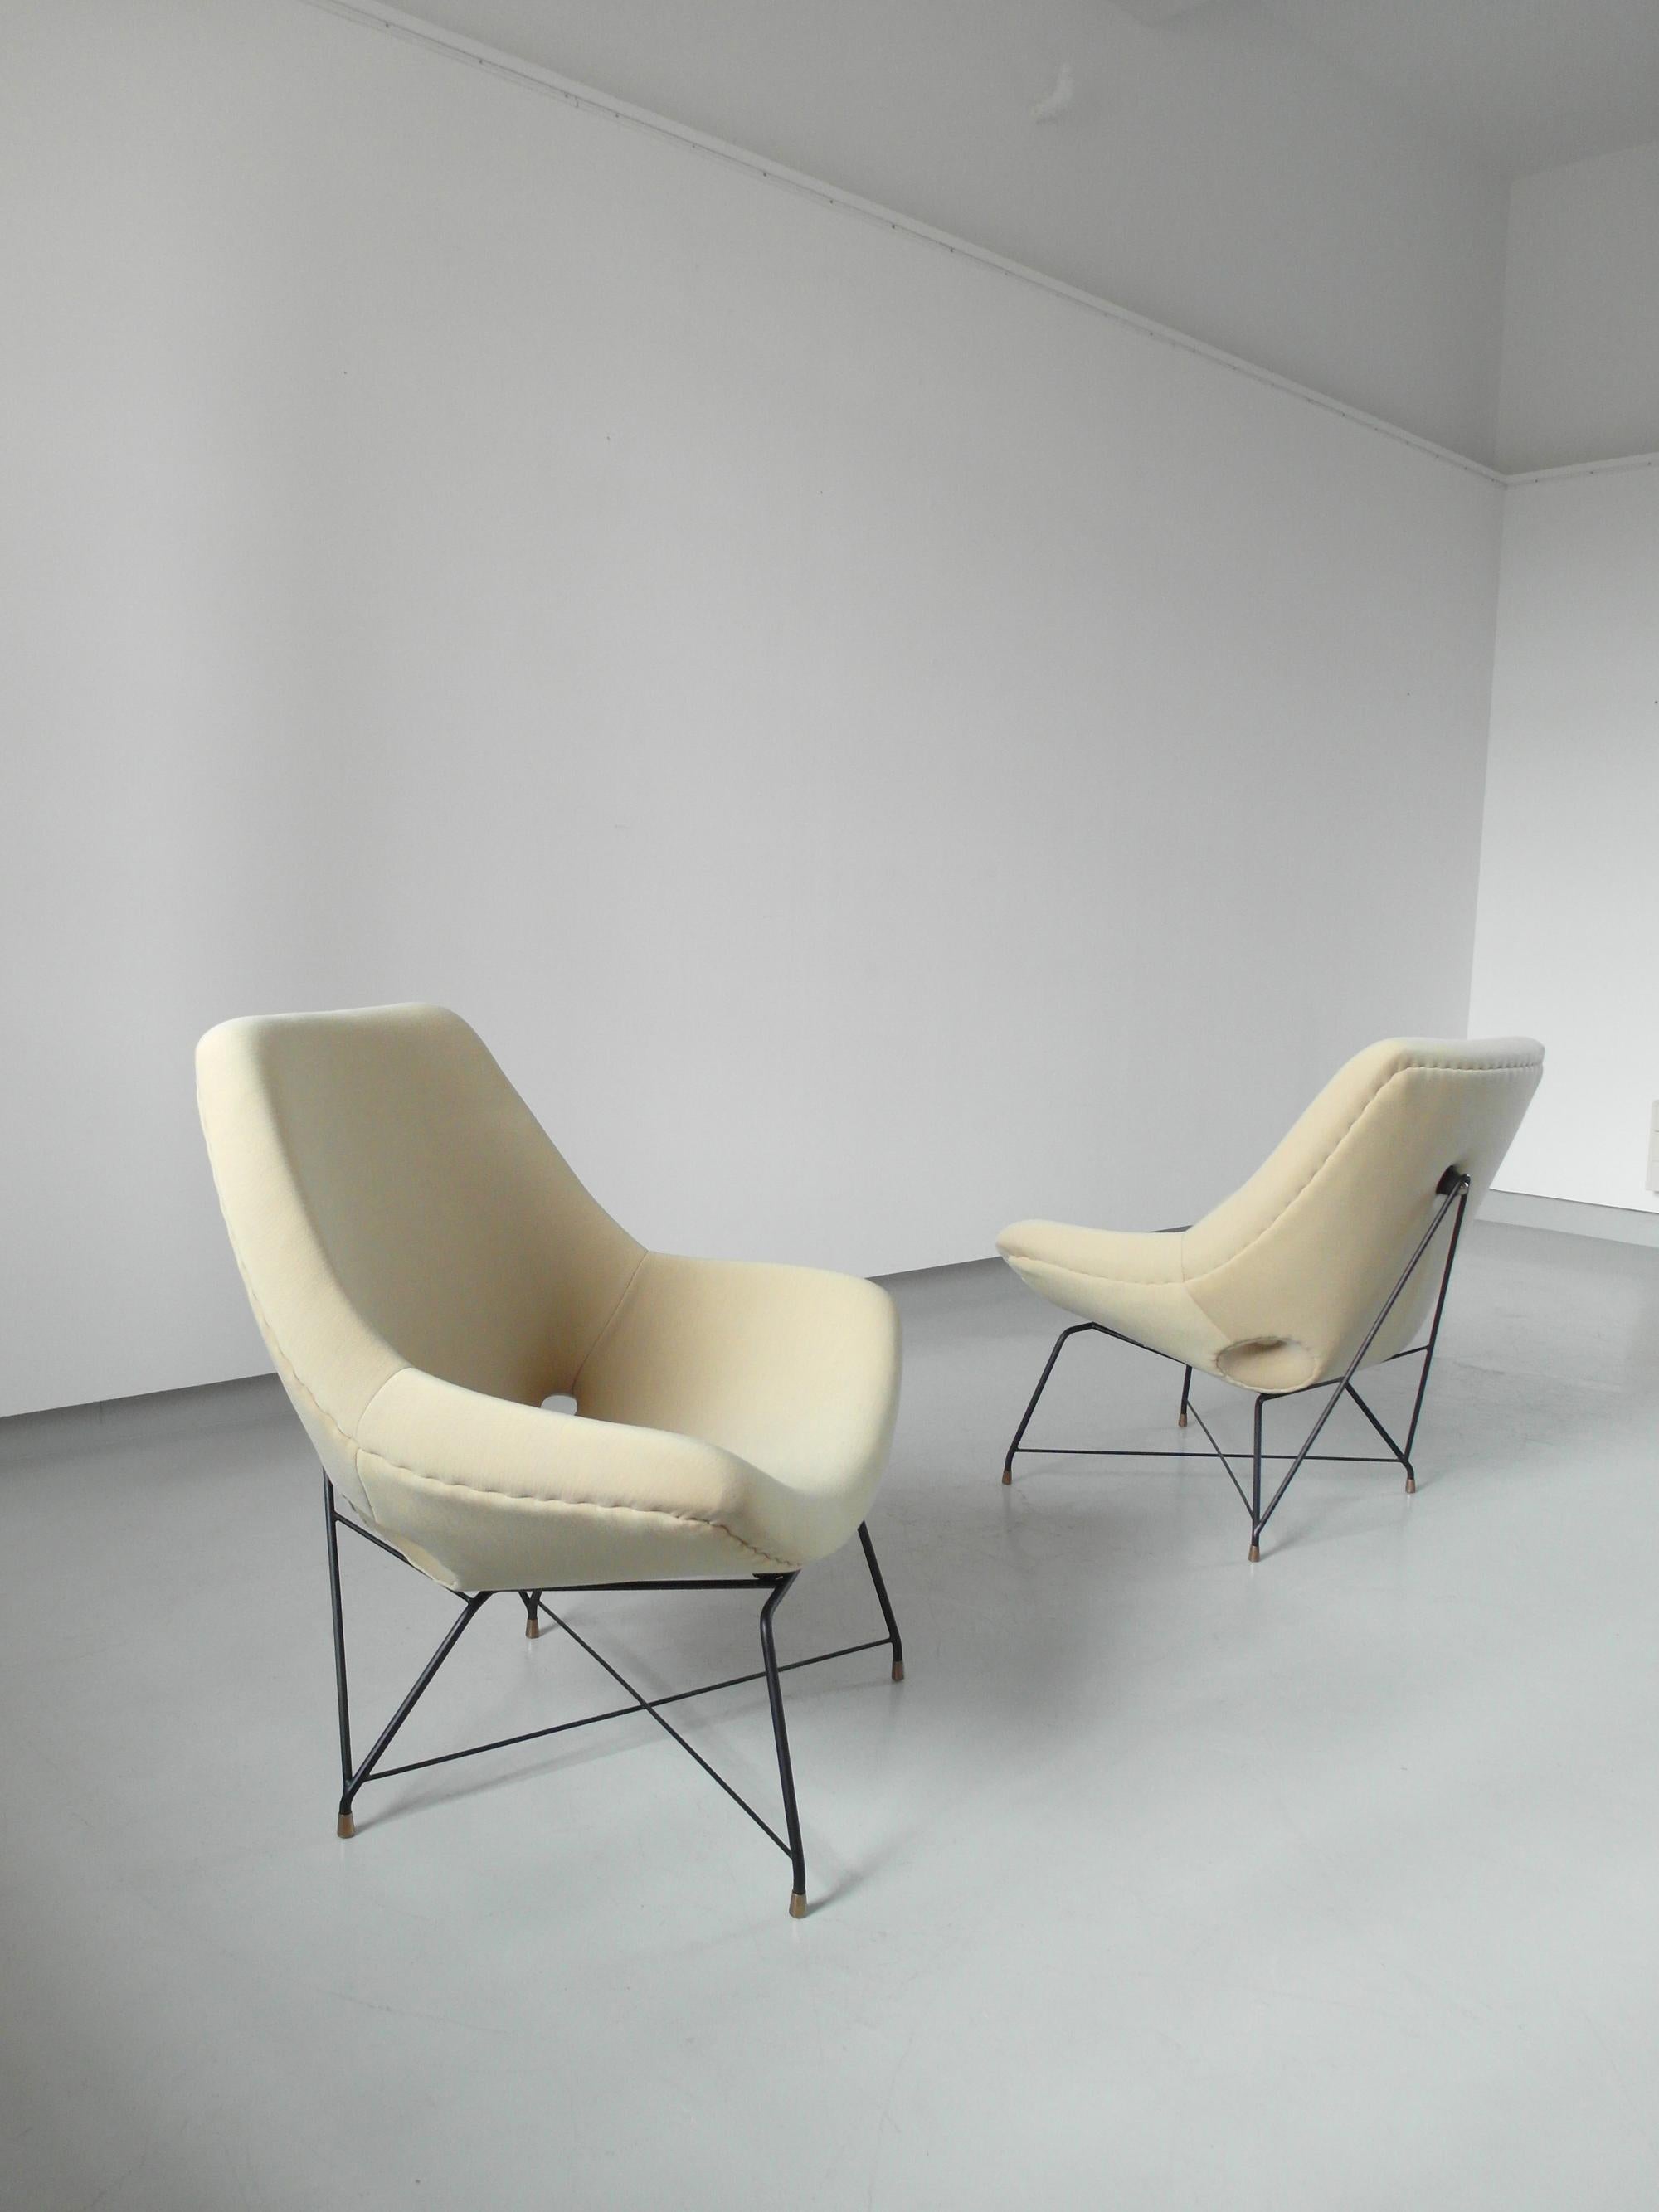 Sculptural pair of lounge chairs metal and fabric, designed by Augusto Bozzi for Saporiti, Italy, 1954. The delicately designed frame is made of black coated metal with elegant brass details. The shell is wide and sculptural and very comfortable.